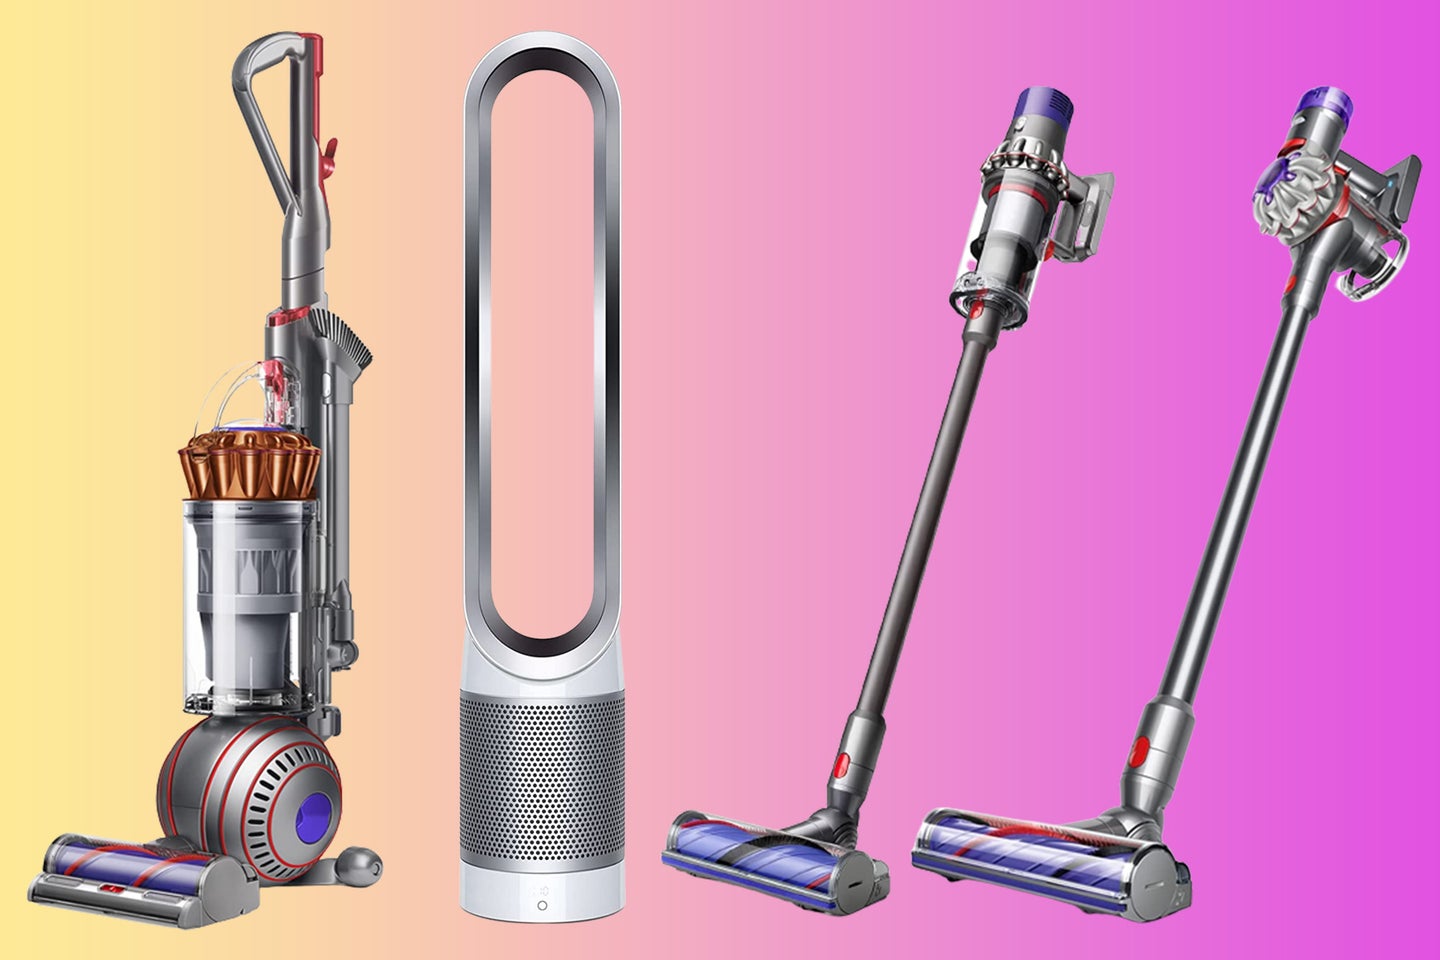 A lineup of Dyson products on a yellow and pink background